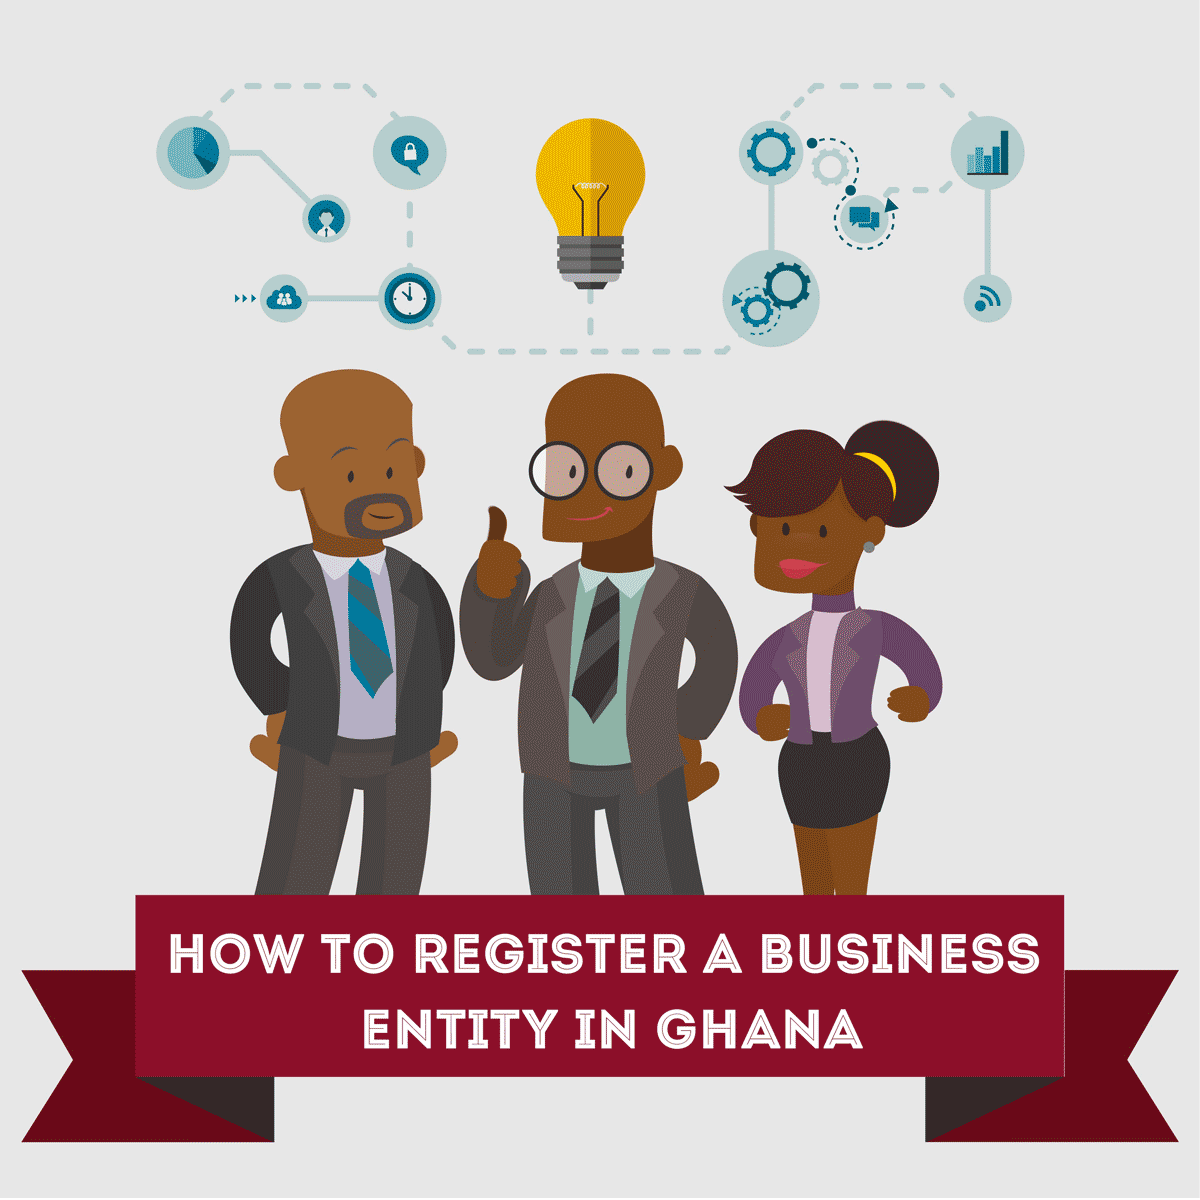 How to Register a Business Entity in Ghana